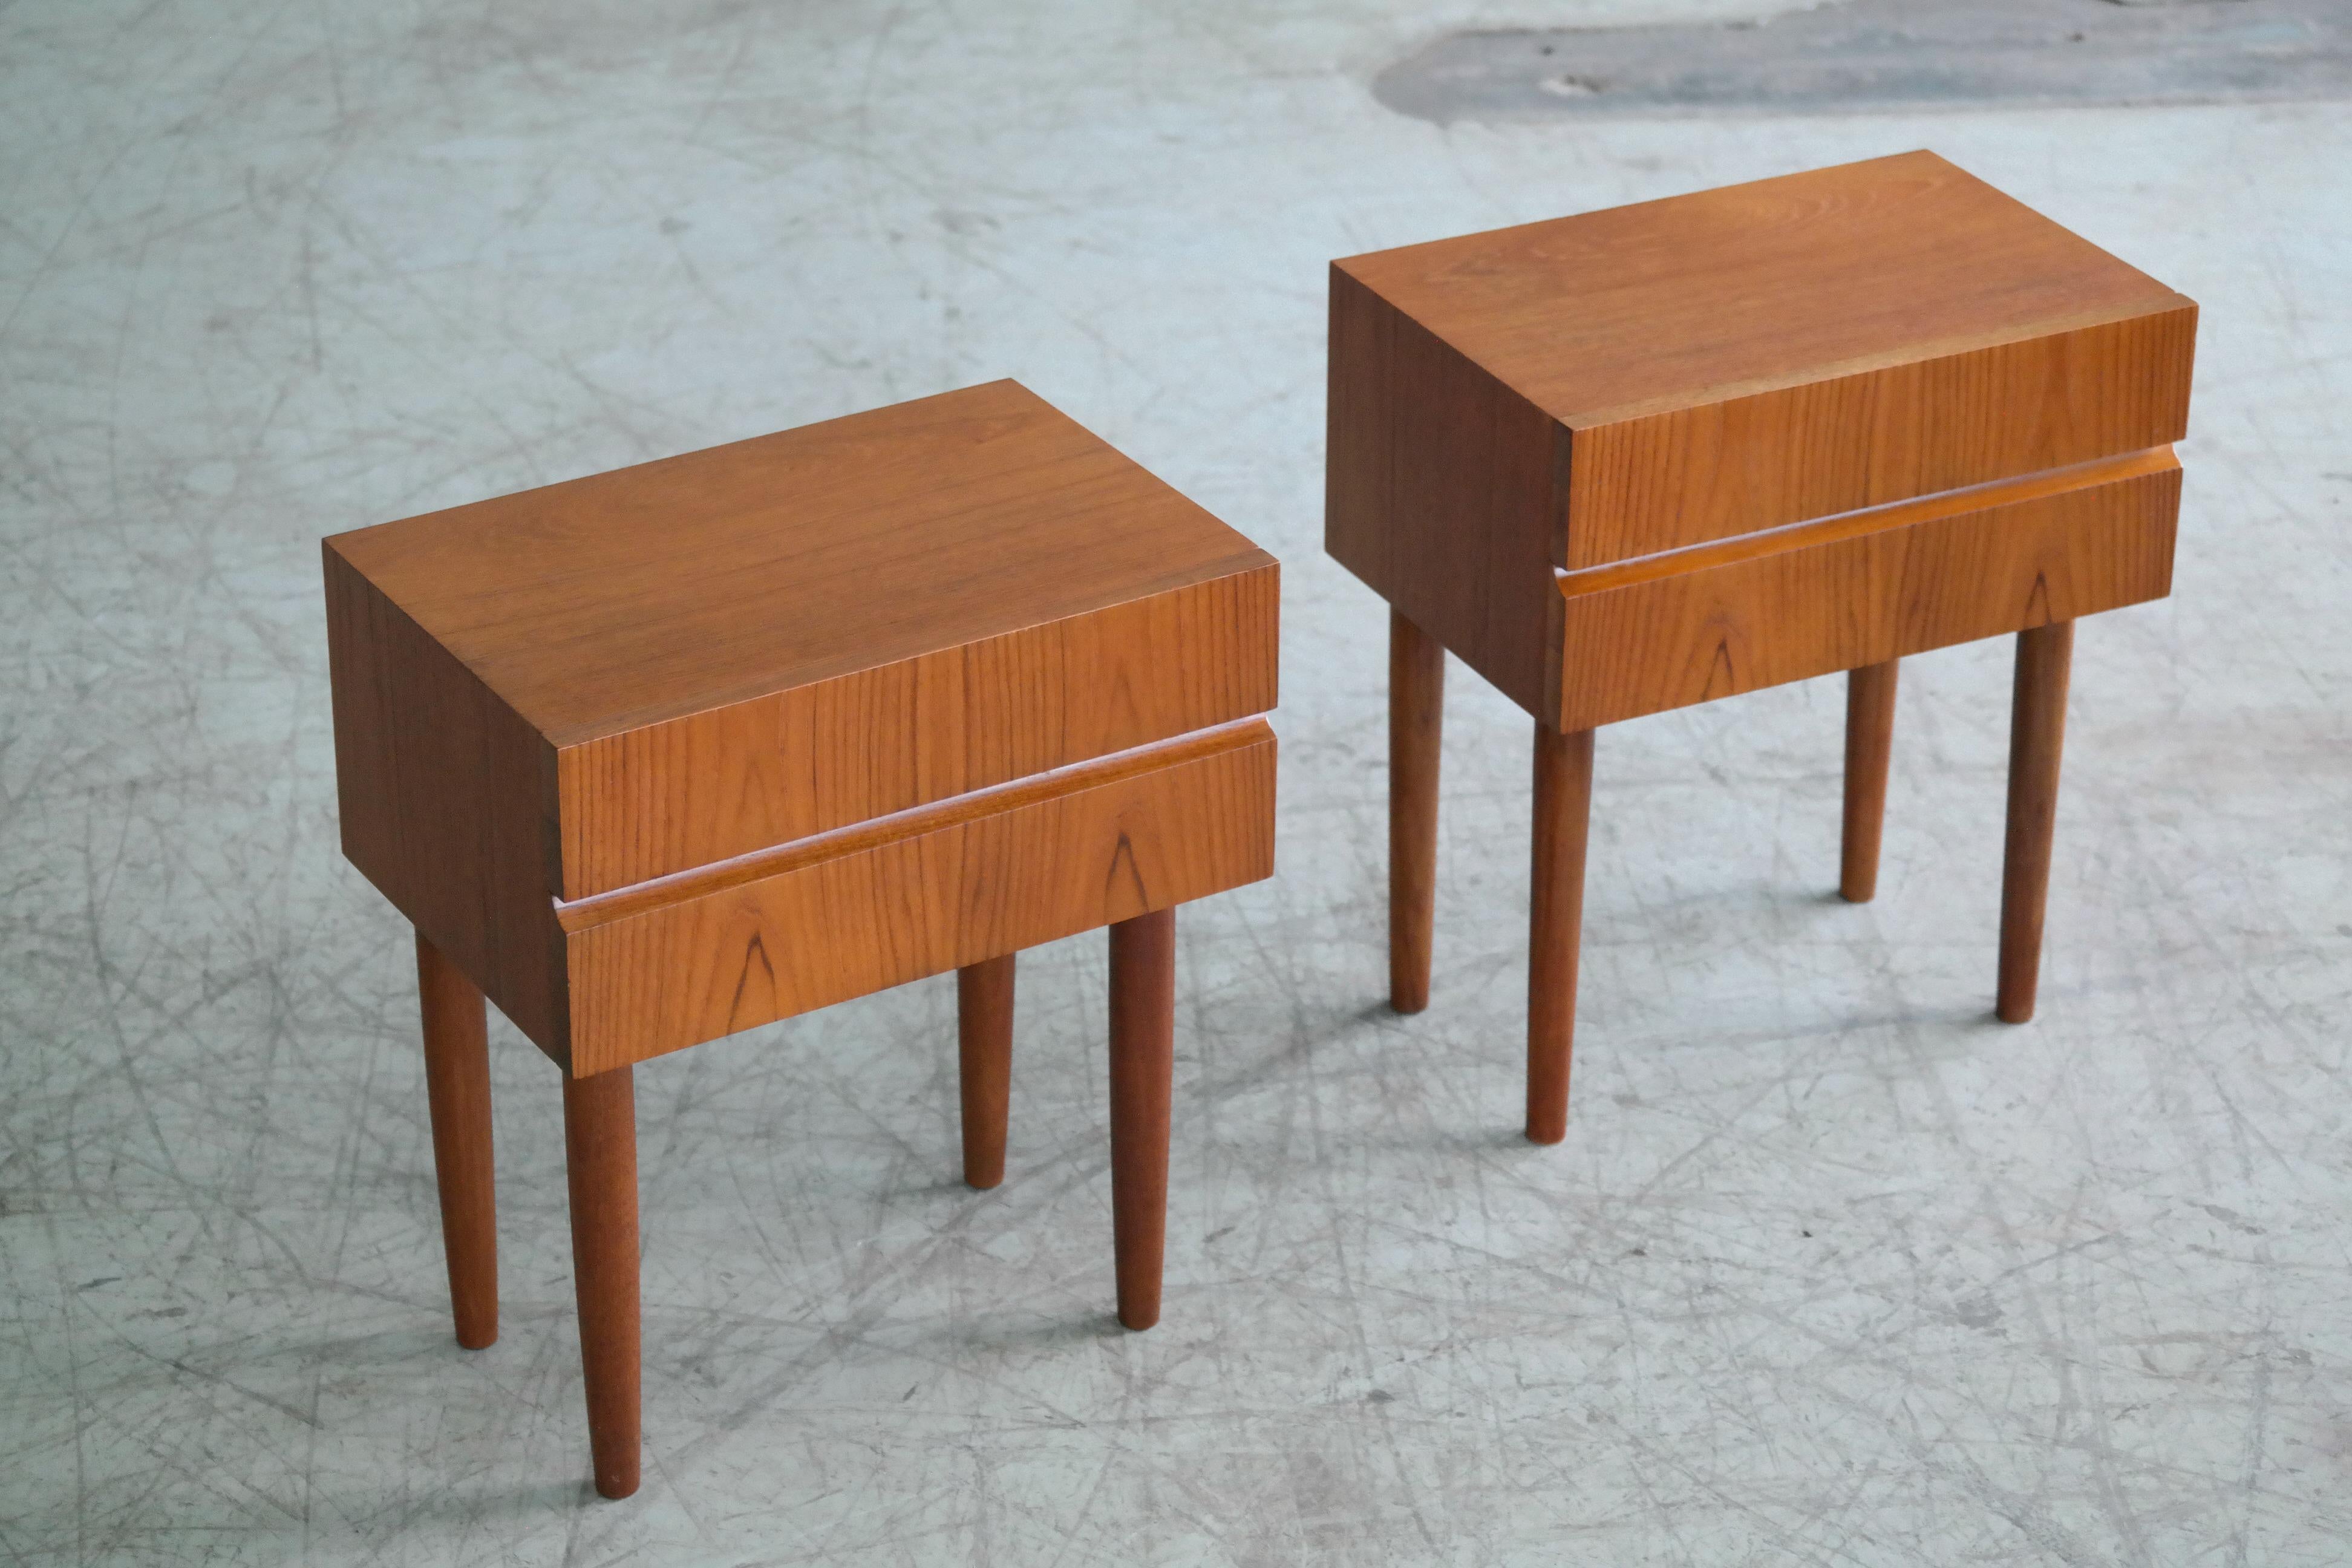 Elegant pair of small nightstands made from solid and teak veneer in Denmark the 1960s. Simple yet very refined design in the style of Ib Kofod-Larsen. Overall very good condition with nice color and grain and only minor signs of wear.